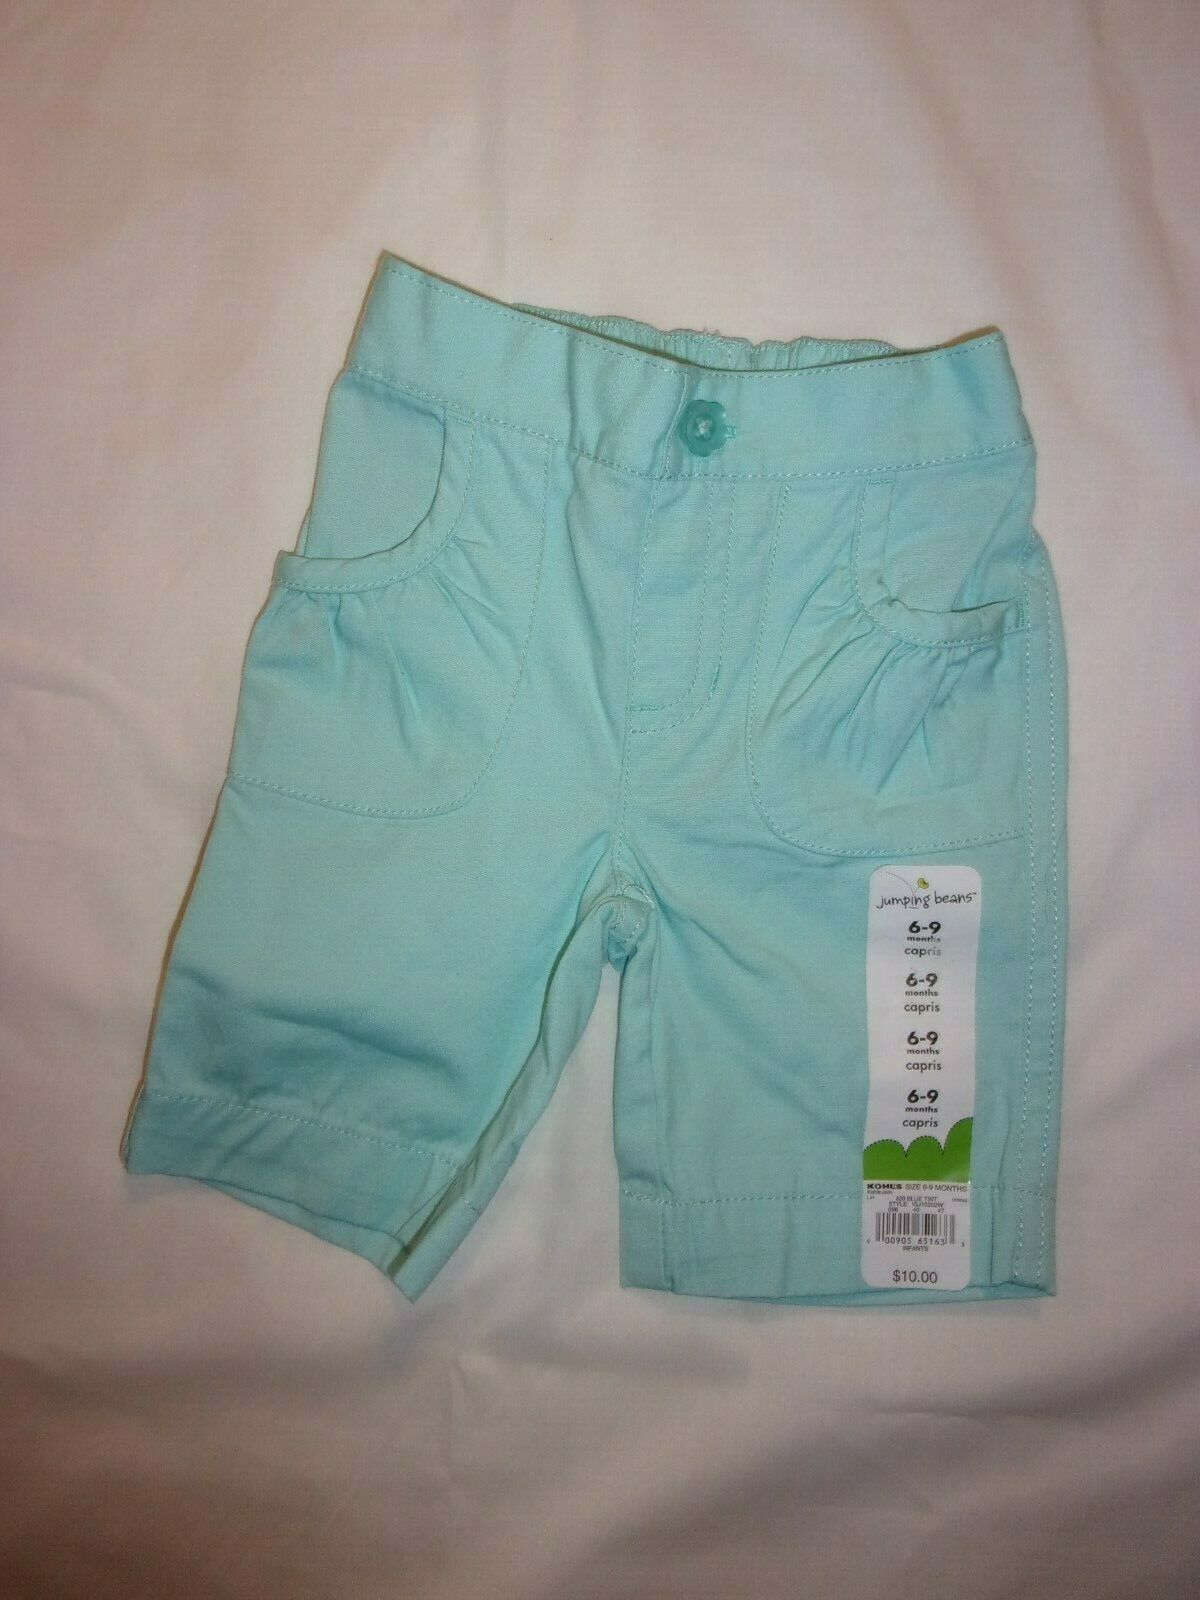 Jumping Beans Baby Girls Blue Tint Pull-On Capris 6-9 MO New W/T - $7.99